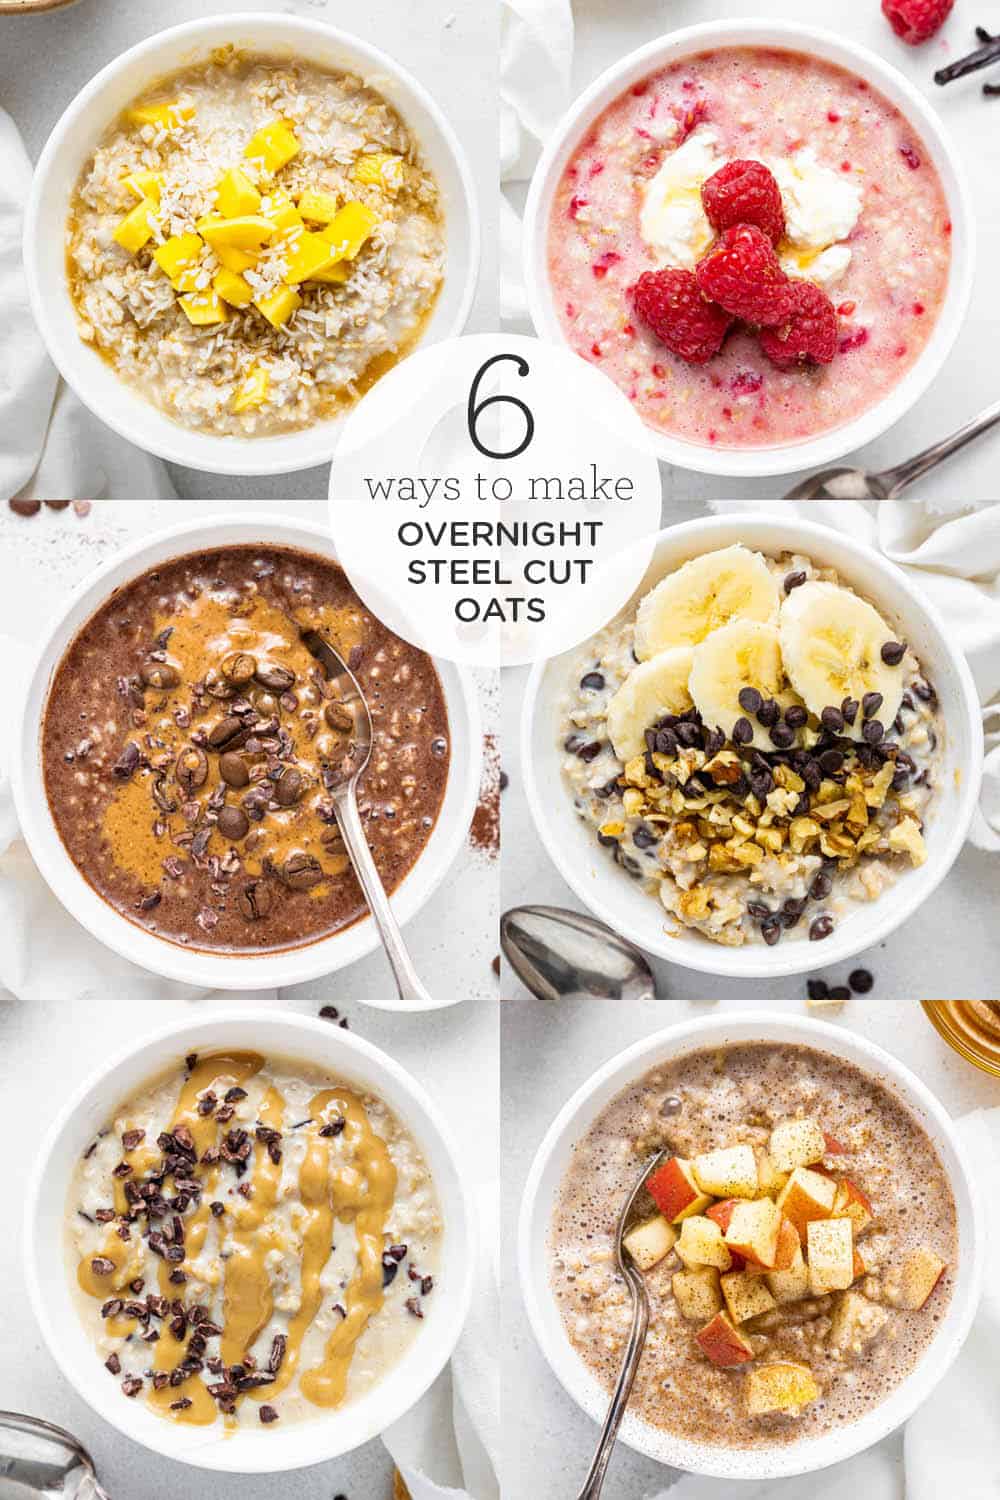 How to Make Overnight Steel Cut Oats - 7 Ways! - Simply Quinoa